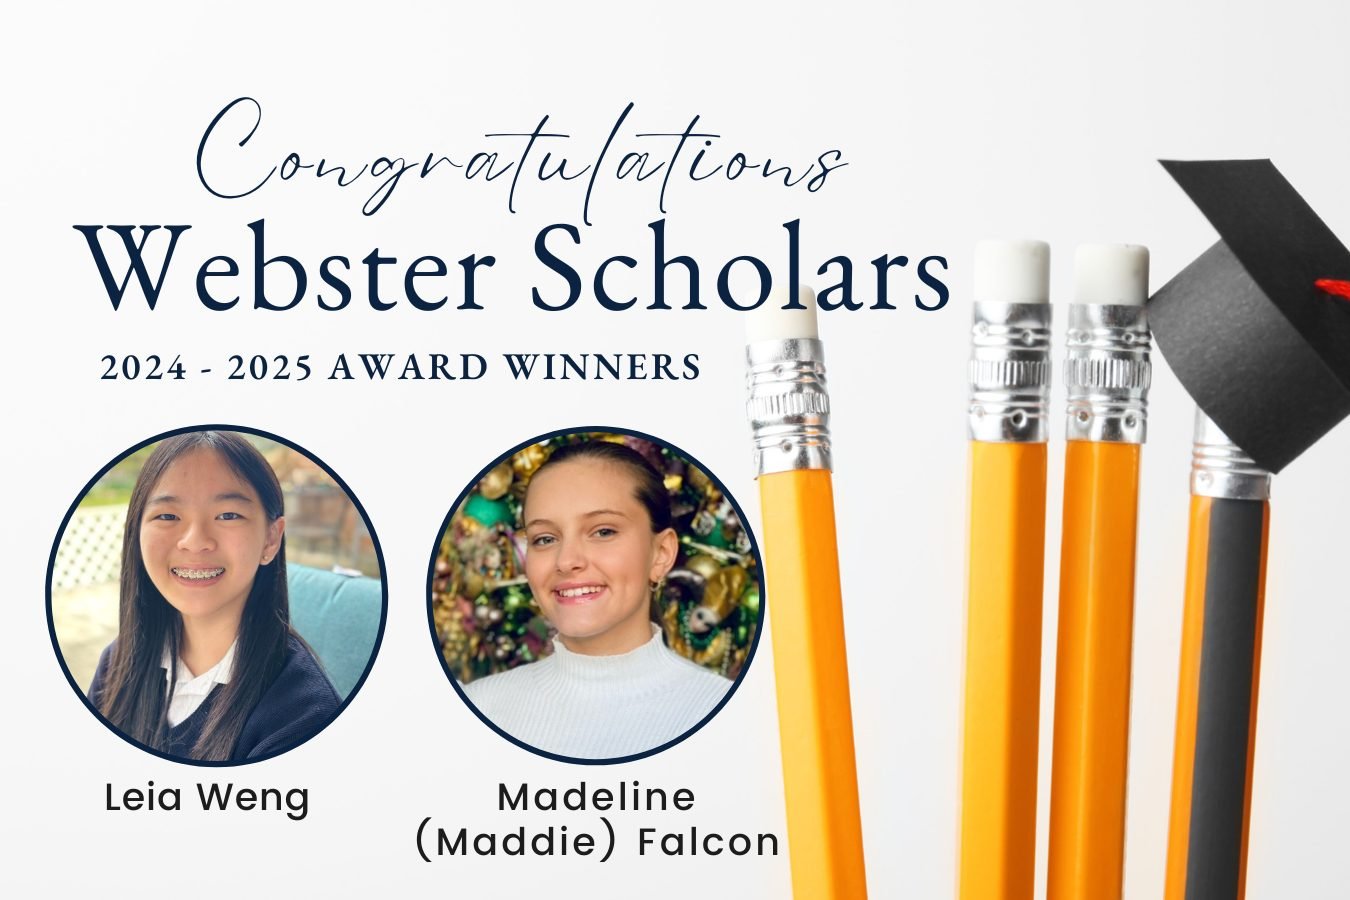 Congratulations to the 2024 Episcopal Webster Scholars!